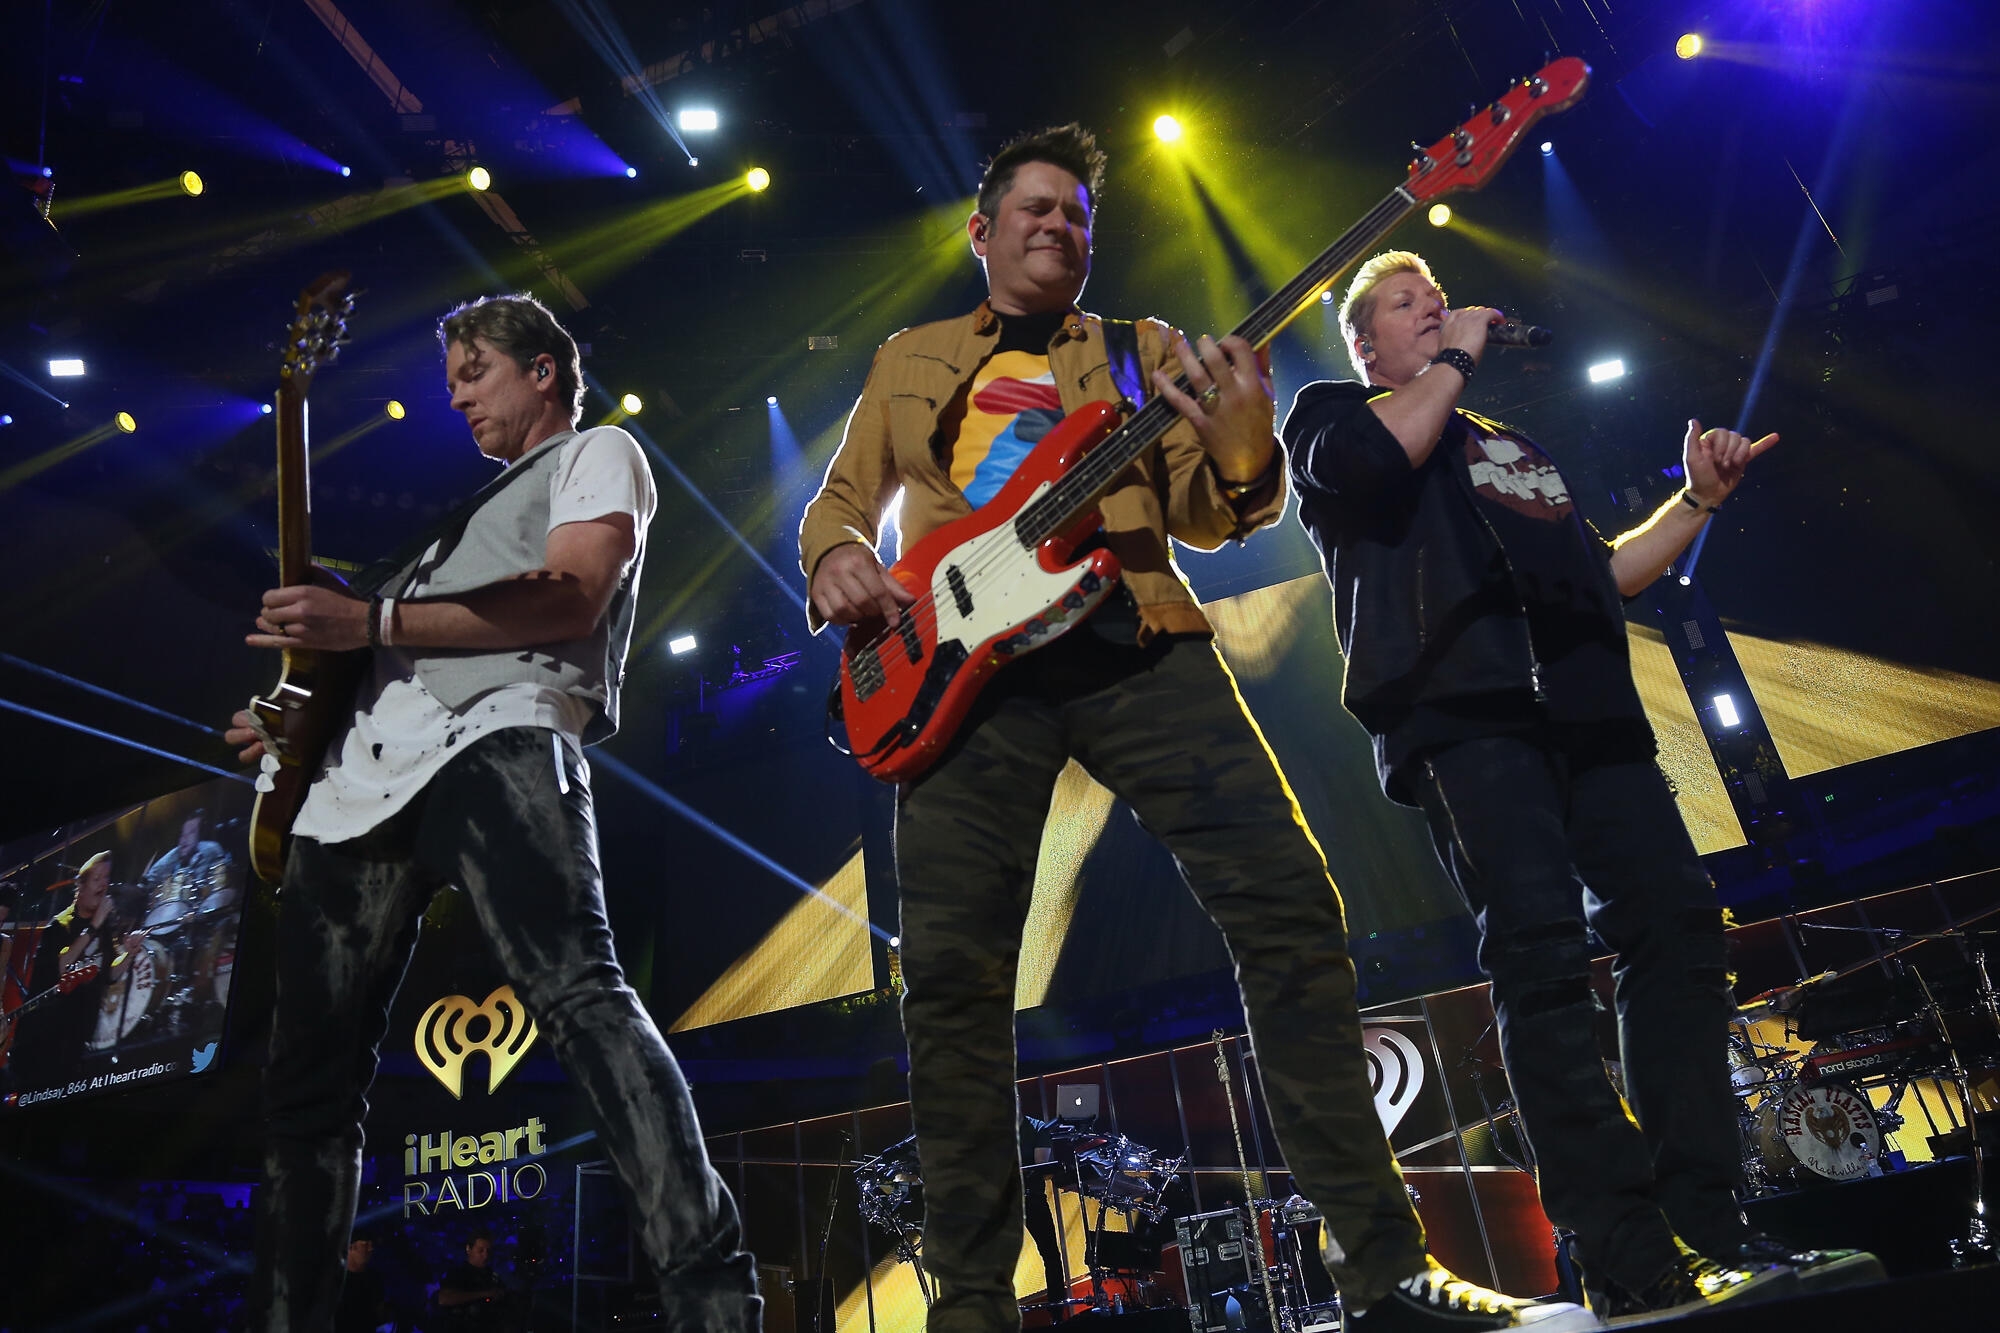 AUSTIN, TX - MAY 06:  Singer Gary LeVox (R) Joe Don Rooney (L) and Jay DeMarcus (C) of Rascal Flatts perform onstage during the 2017 iHeartCountry Festival, A Music Experience by AT&T at The Frank Erwin Center on May 6, 2017 in Austin, Texas.  (Photo by G